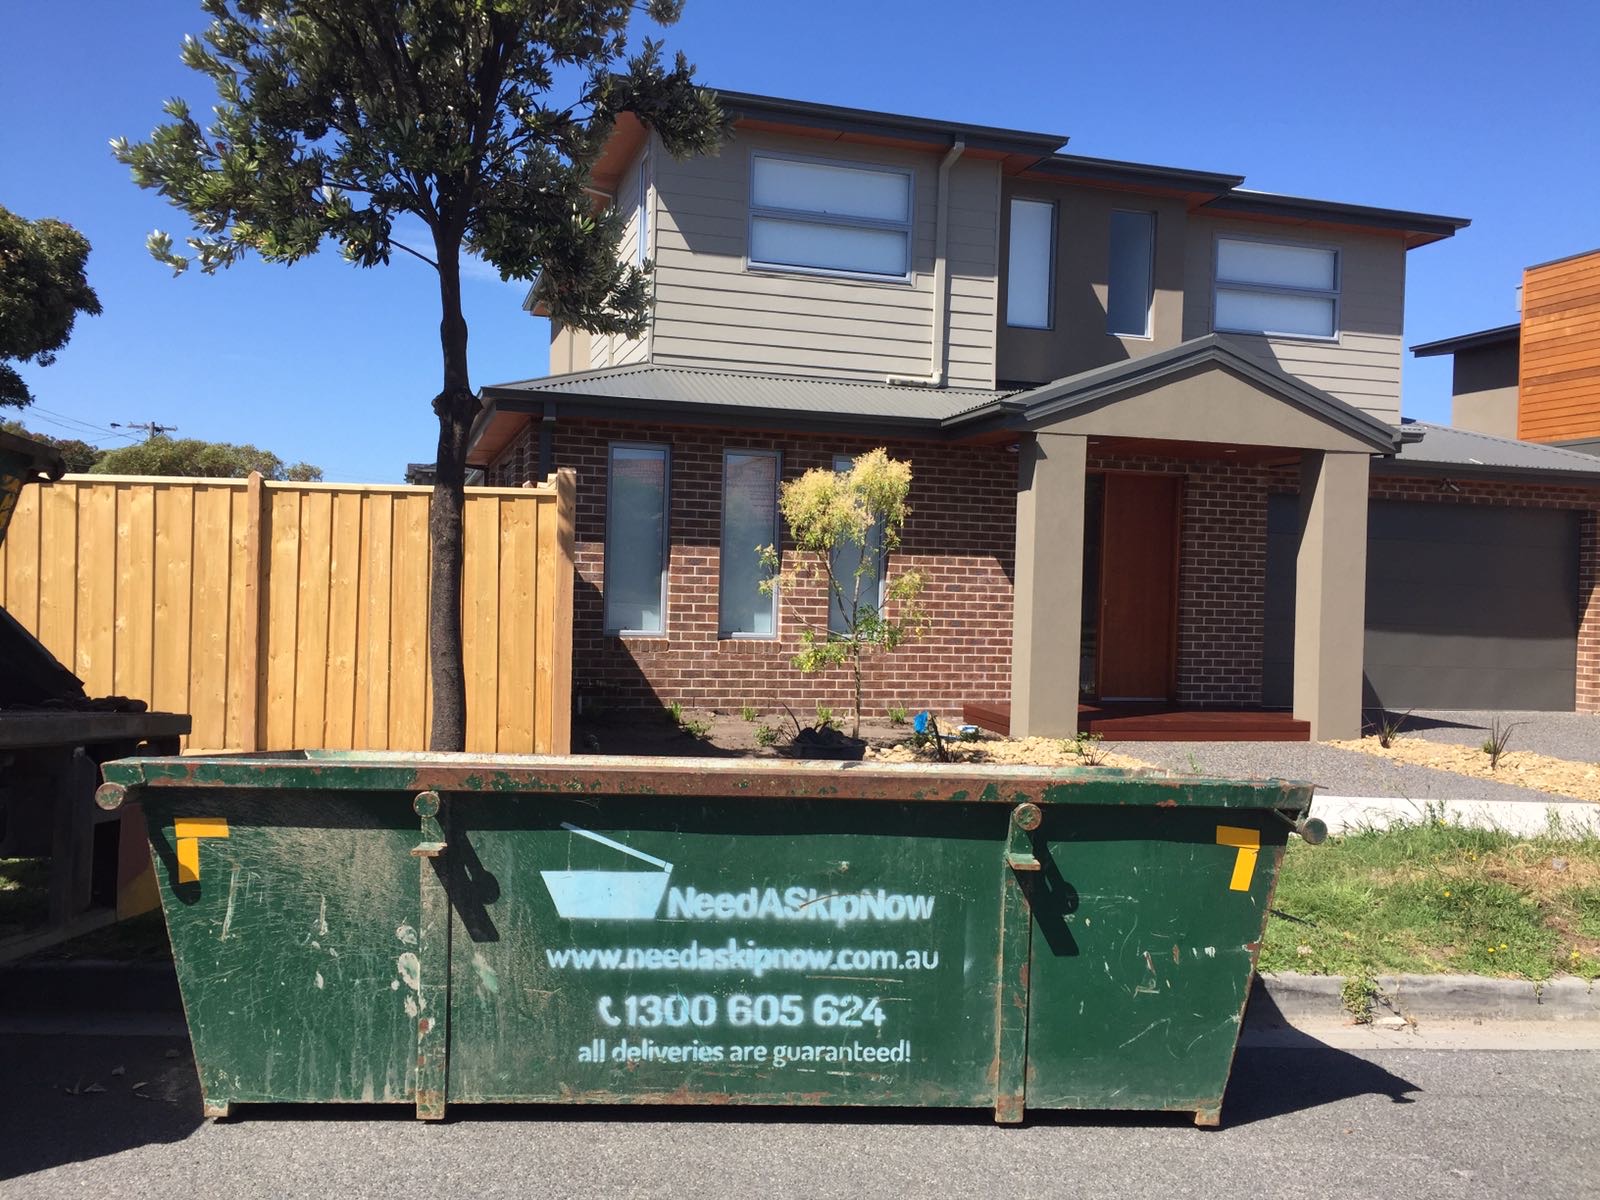 Need a Skip Now, Residential Bin Hire